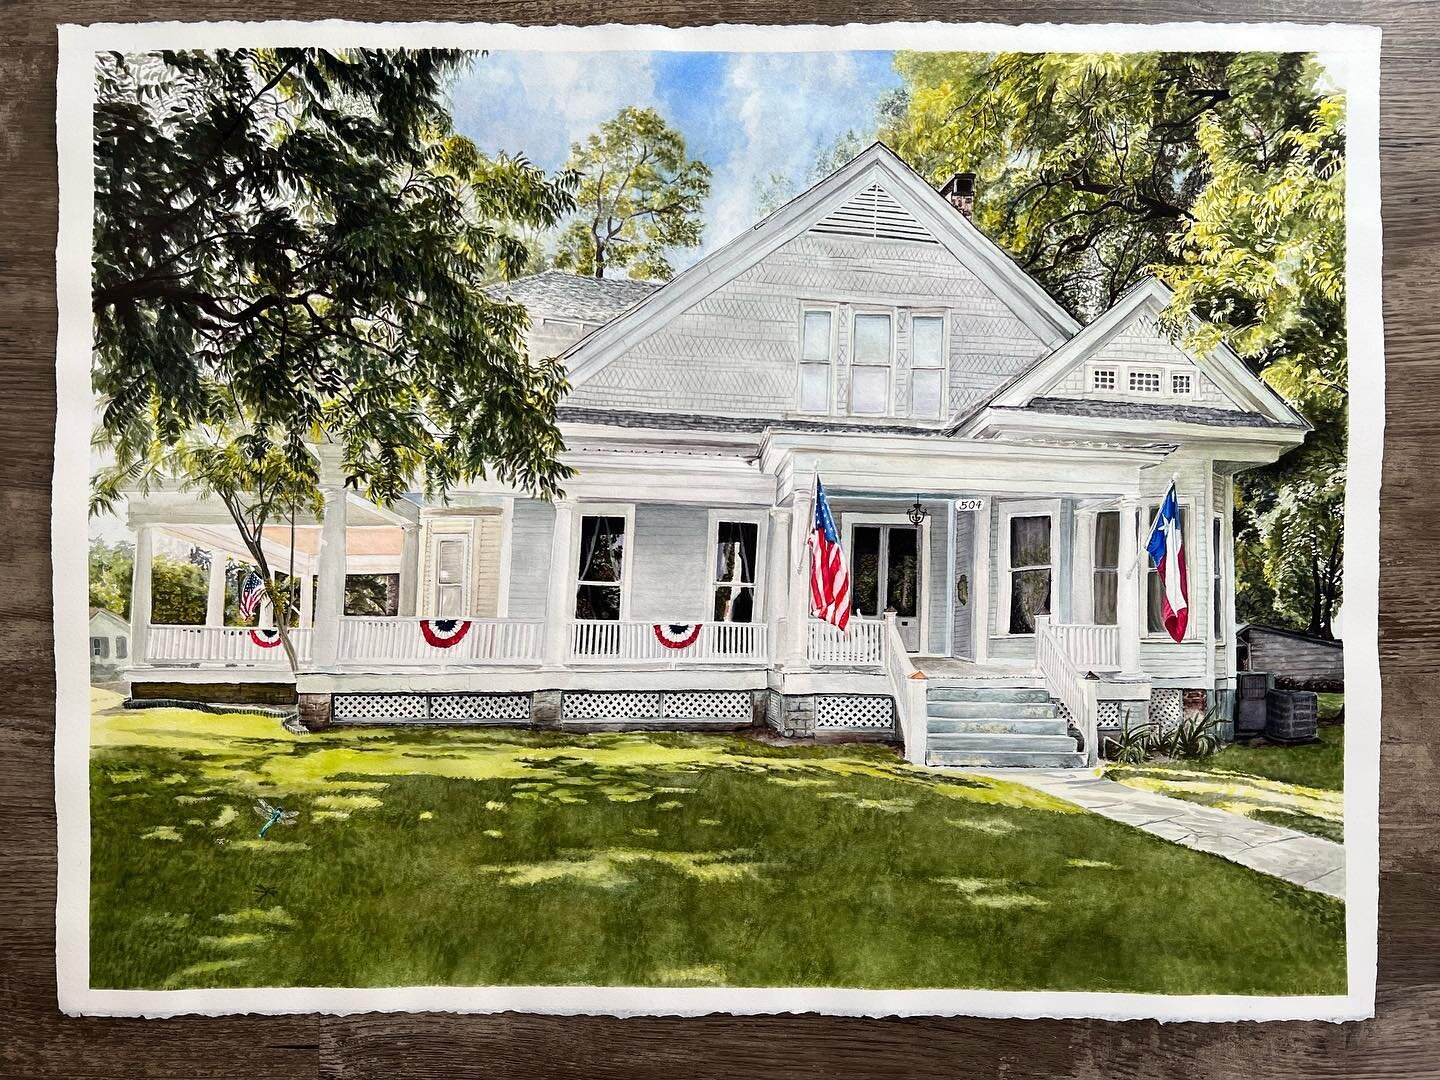 Don&rsquo;t let this small image fool you, This. Was. A. Biggy! My sweet friend @alphaponykh commissioned me to paint her historic home in TX. A few months and many (many) leaves later, it&rsquo;s complete! Ahh I wish I were there on that porch right